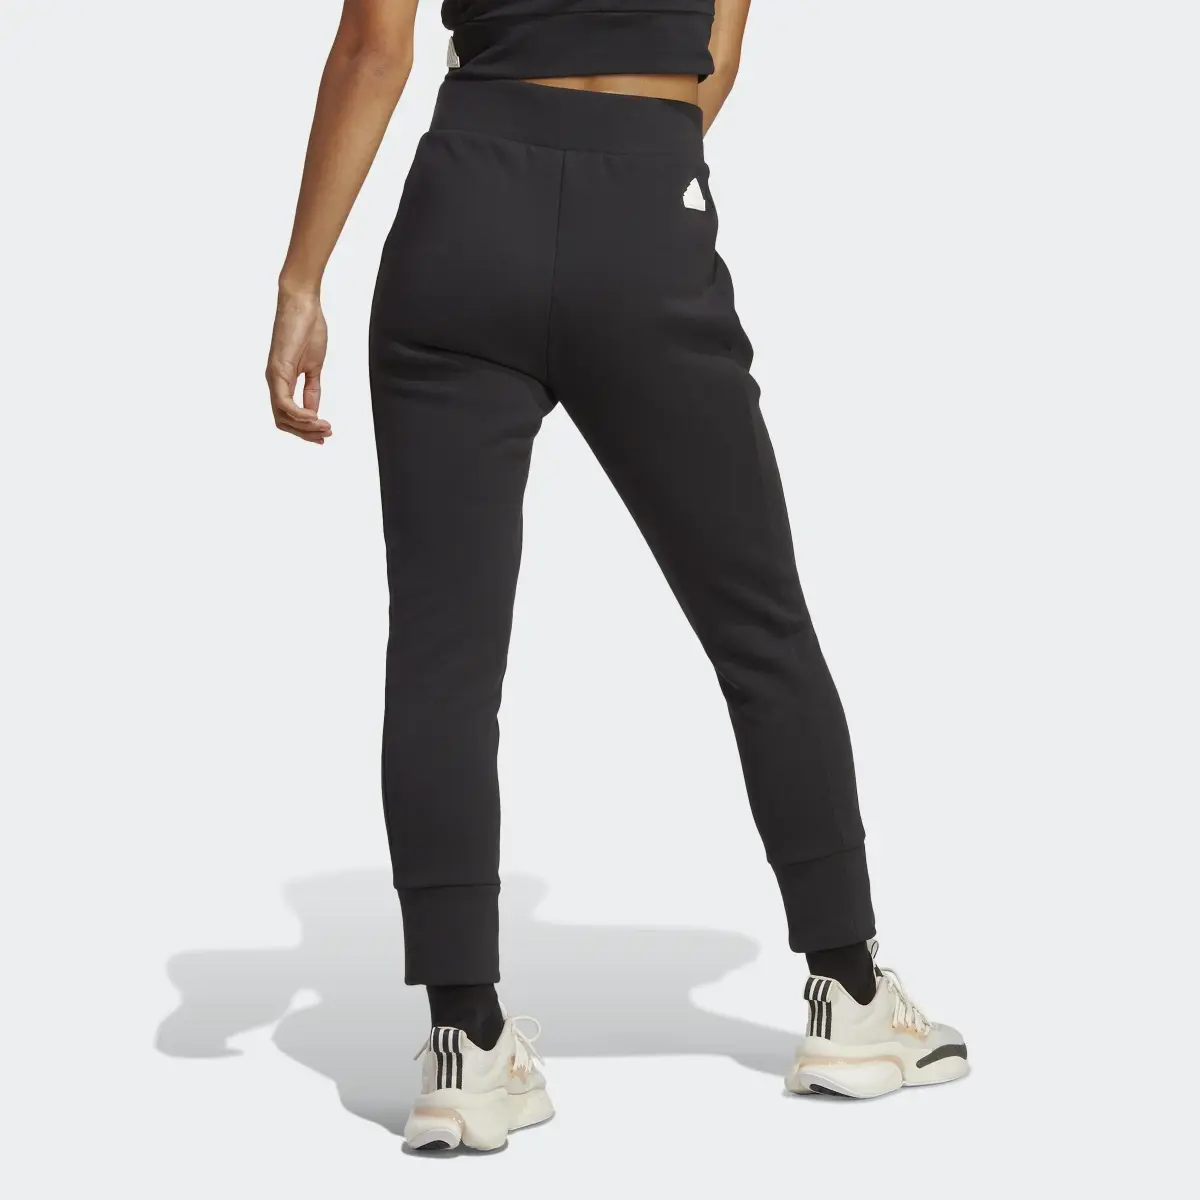 Adidas Mission Victory High-Waist 7/8 Tracksuit Bottoms. 2